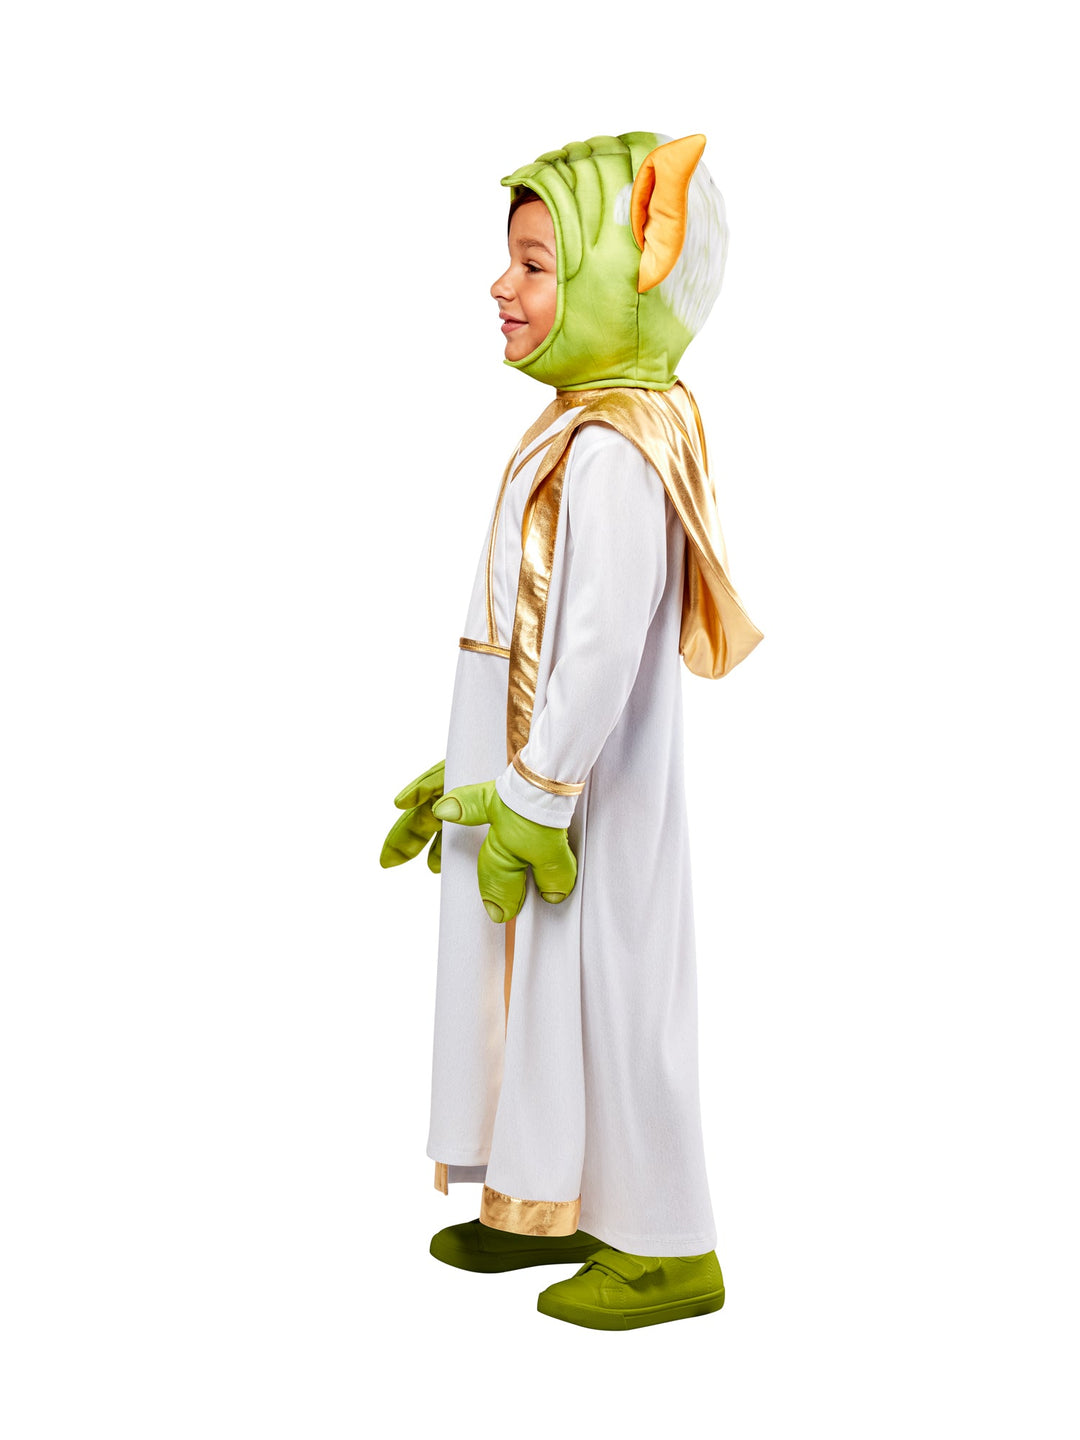 Master Yoda Costume for Children Young Jedi Adventures_5